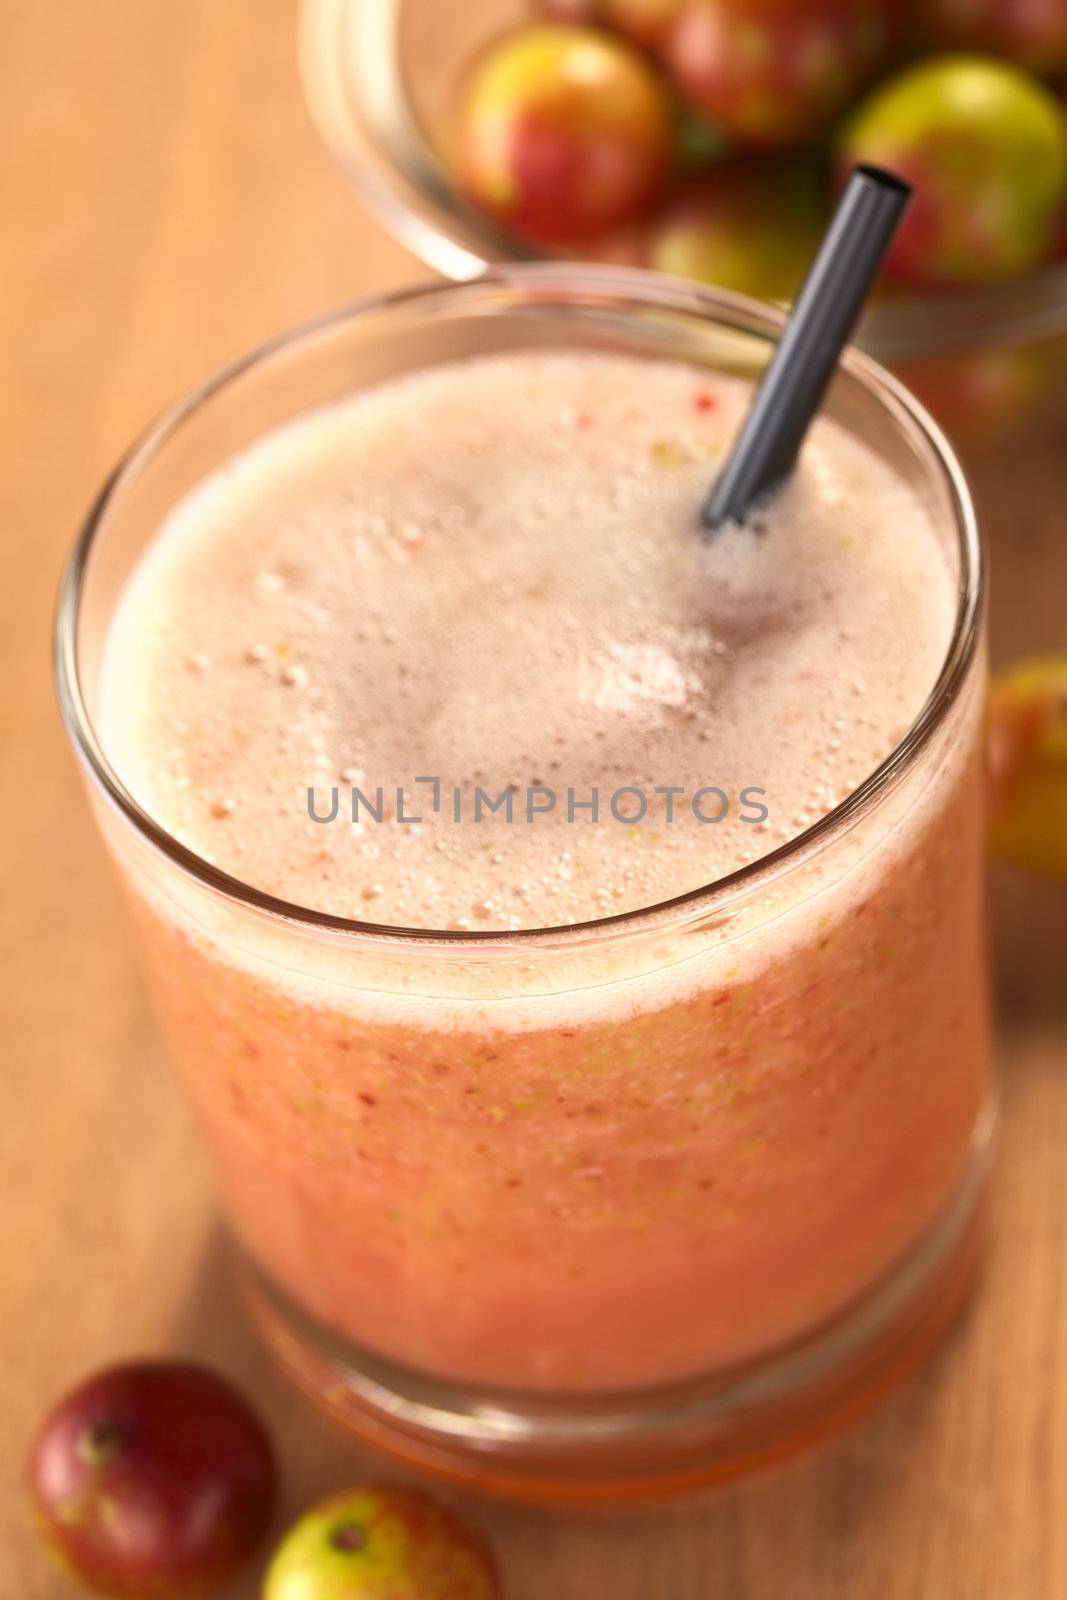 Juice out of Camu camu berry fruits (lat. Myrciaria dubia) which are grown in the Amazon region and have a very high Vitamin C content (Selective Focus, Focus on the front rim of the glass)